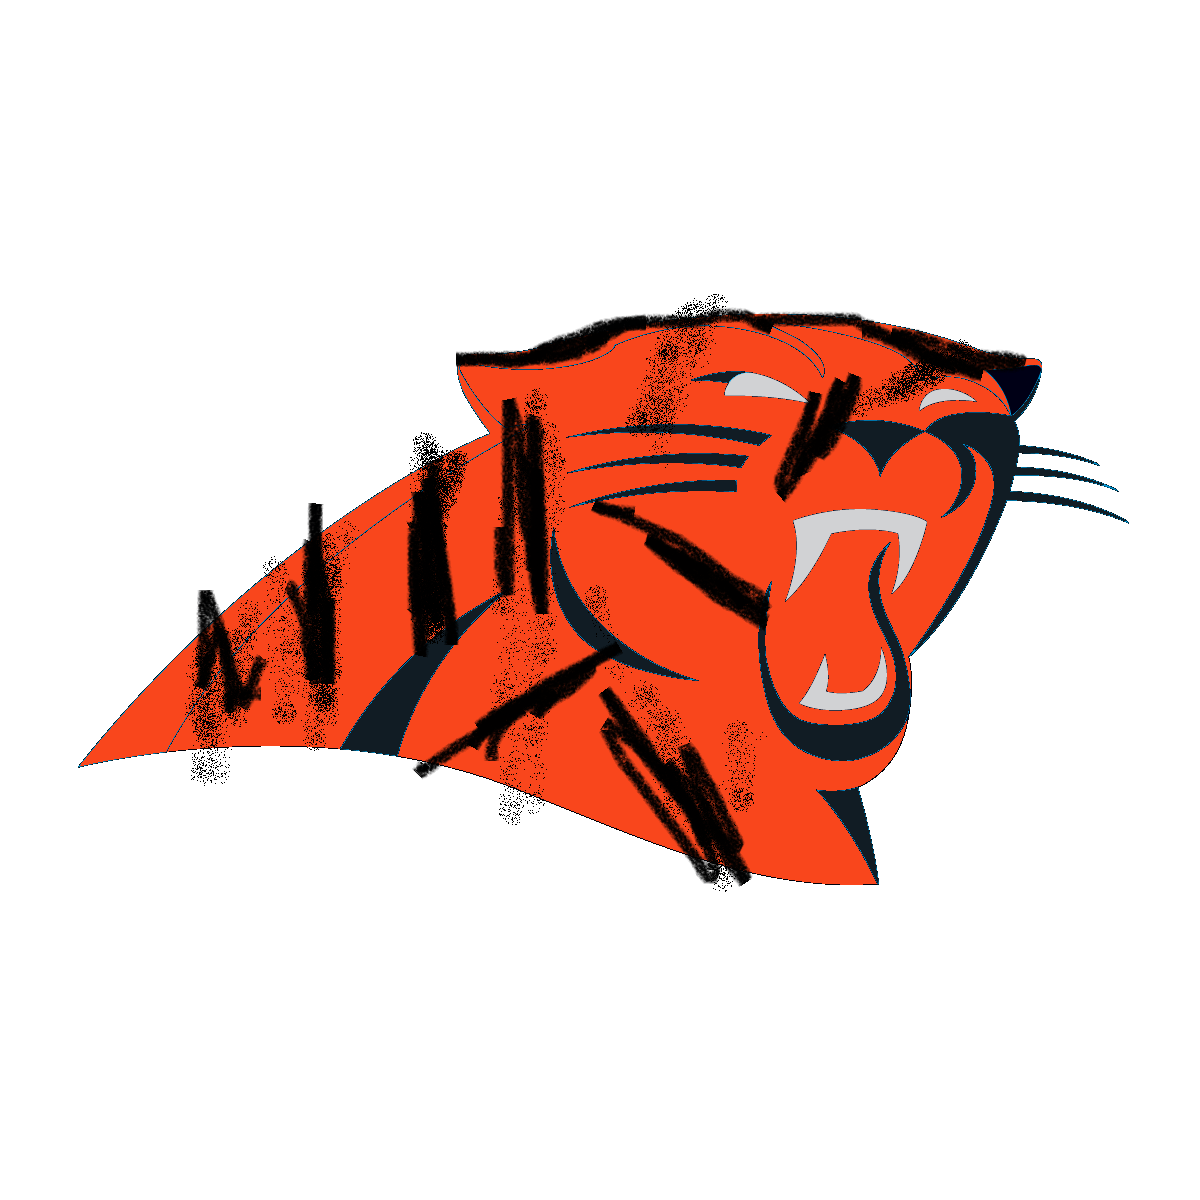 Bengals Logo - Anyone else think we should go back to the tiger head as our primary